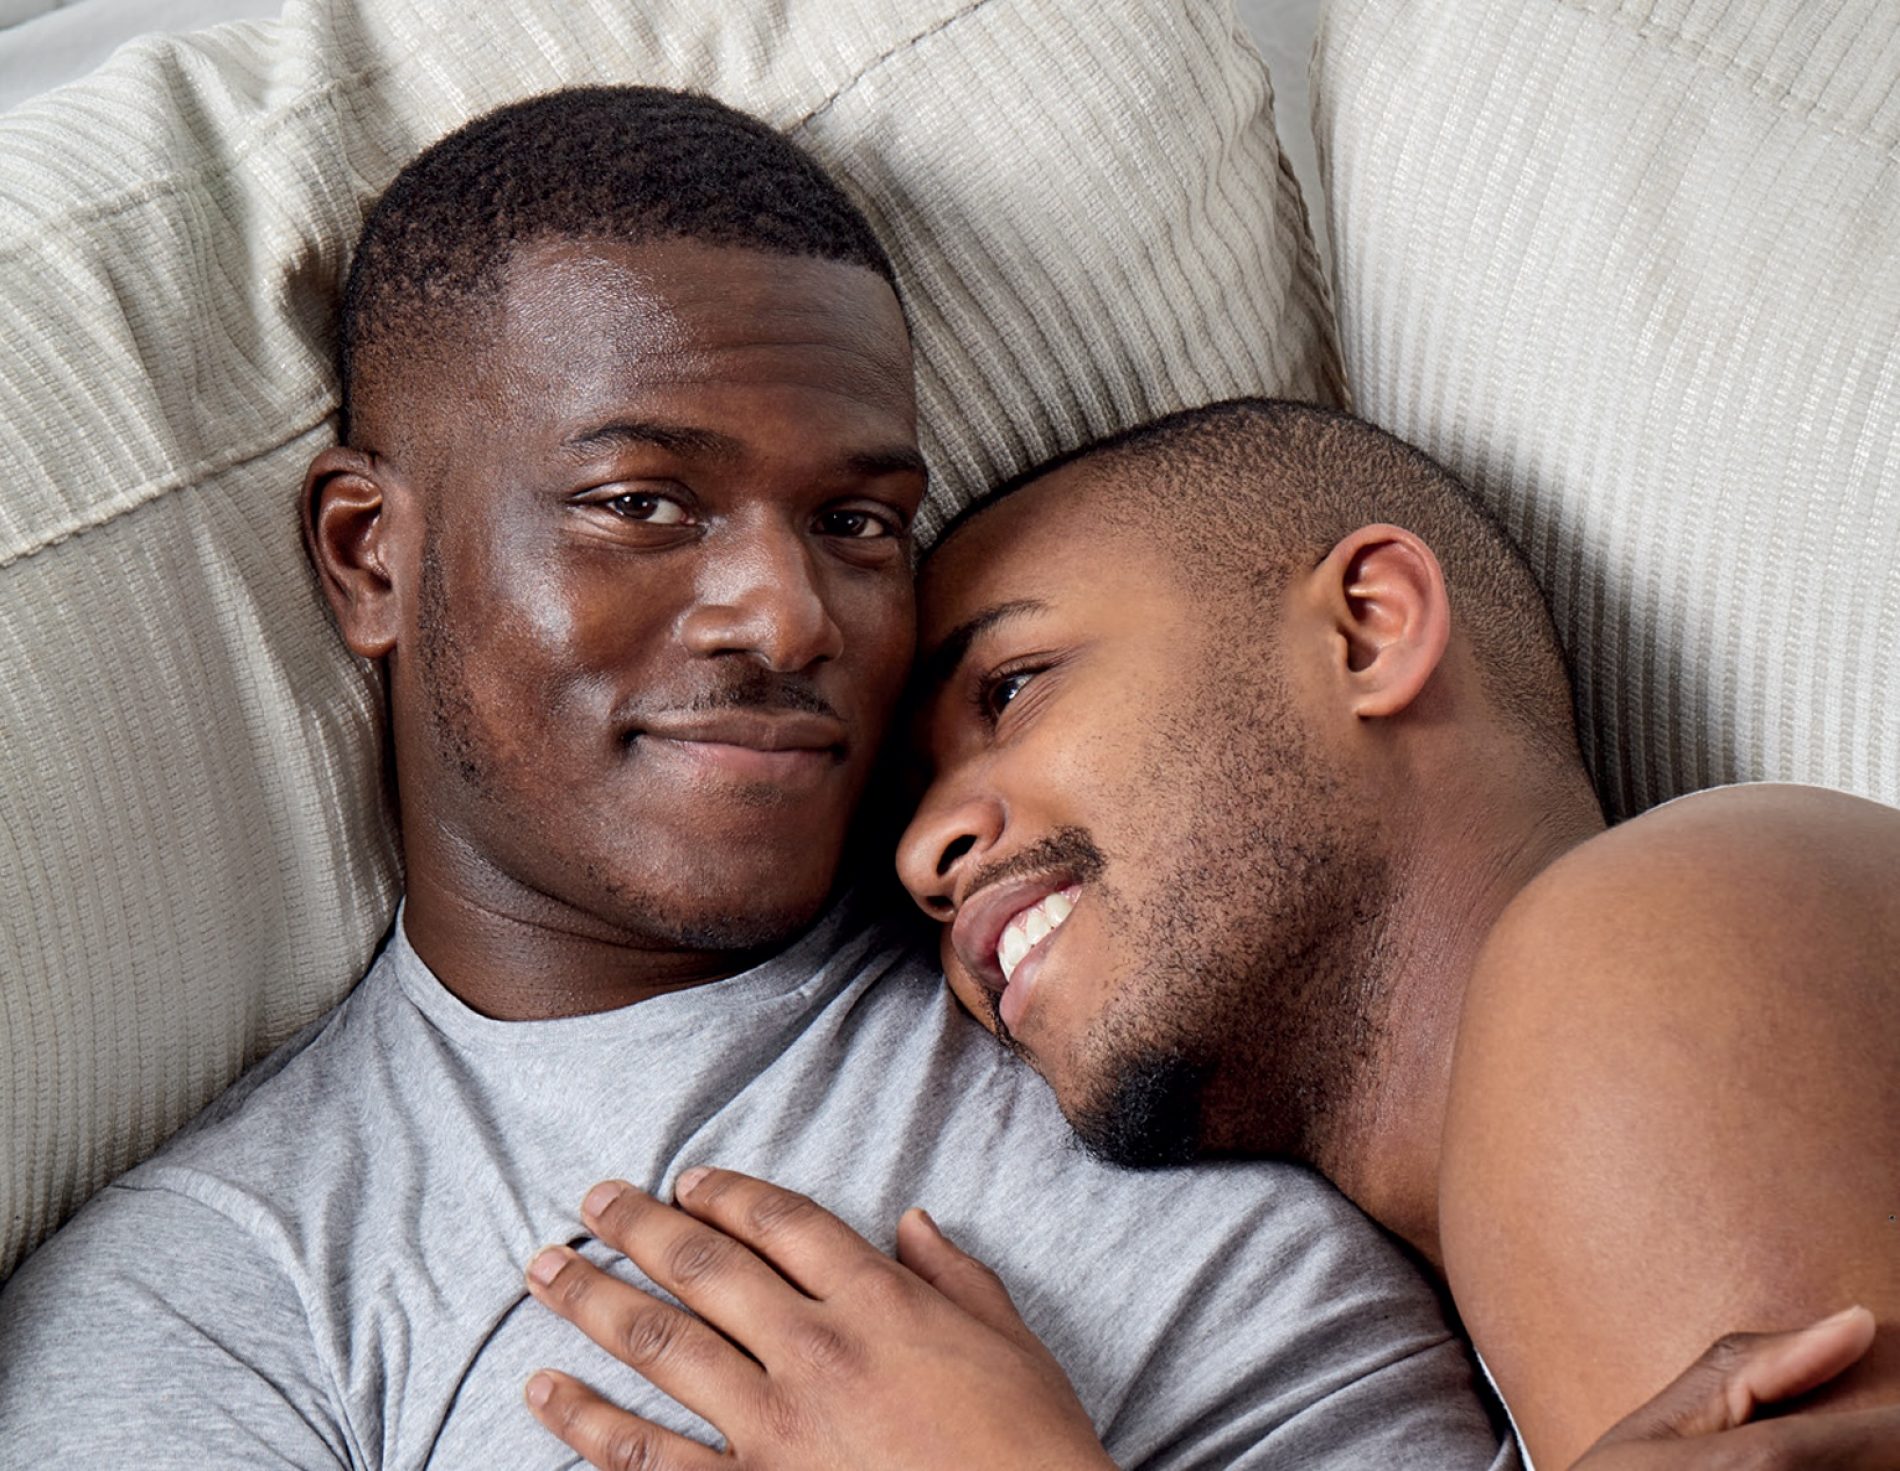 “What’s The Weirdest, Wildest Thing You’ve Done With A Hookup?” Gay guys are talking